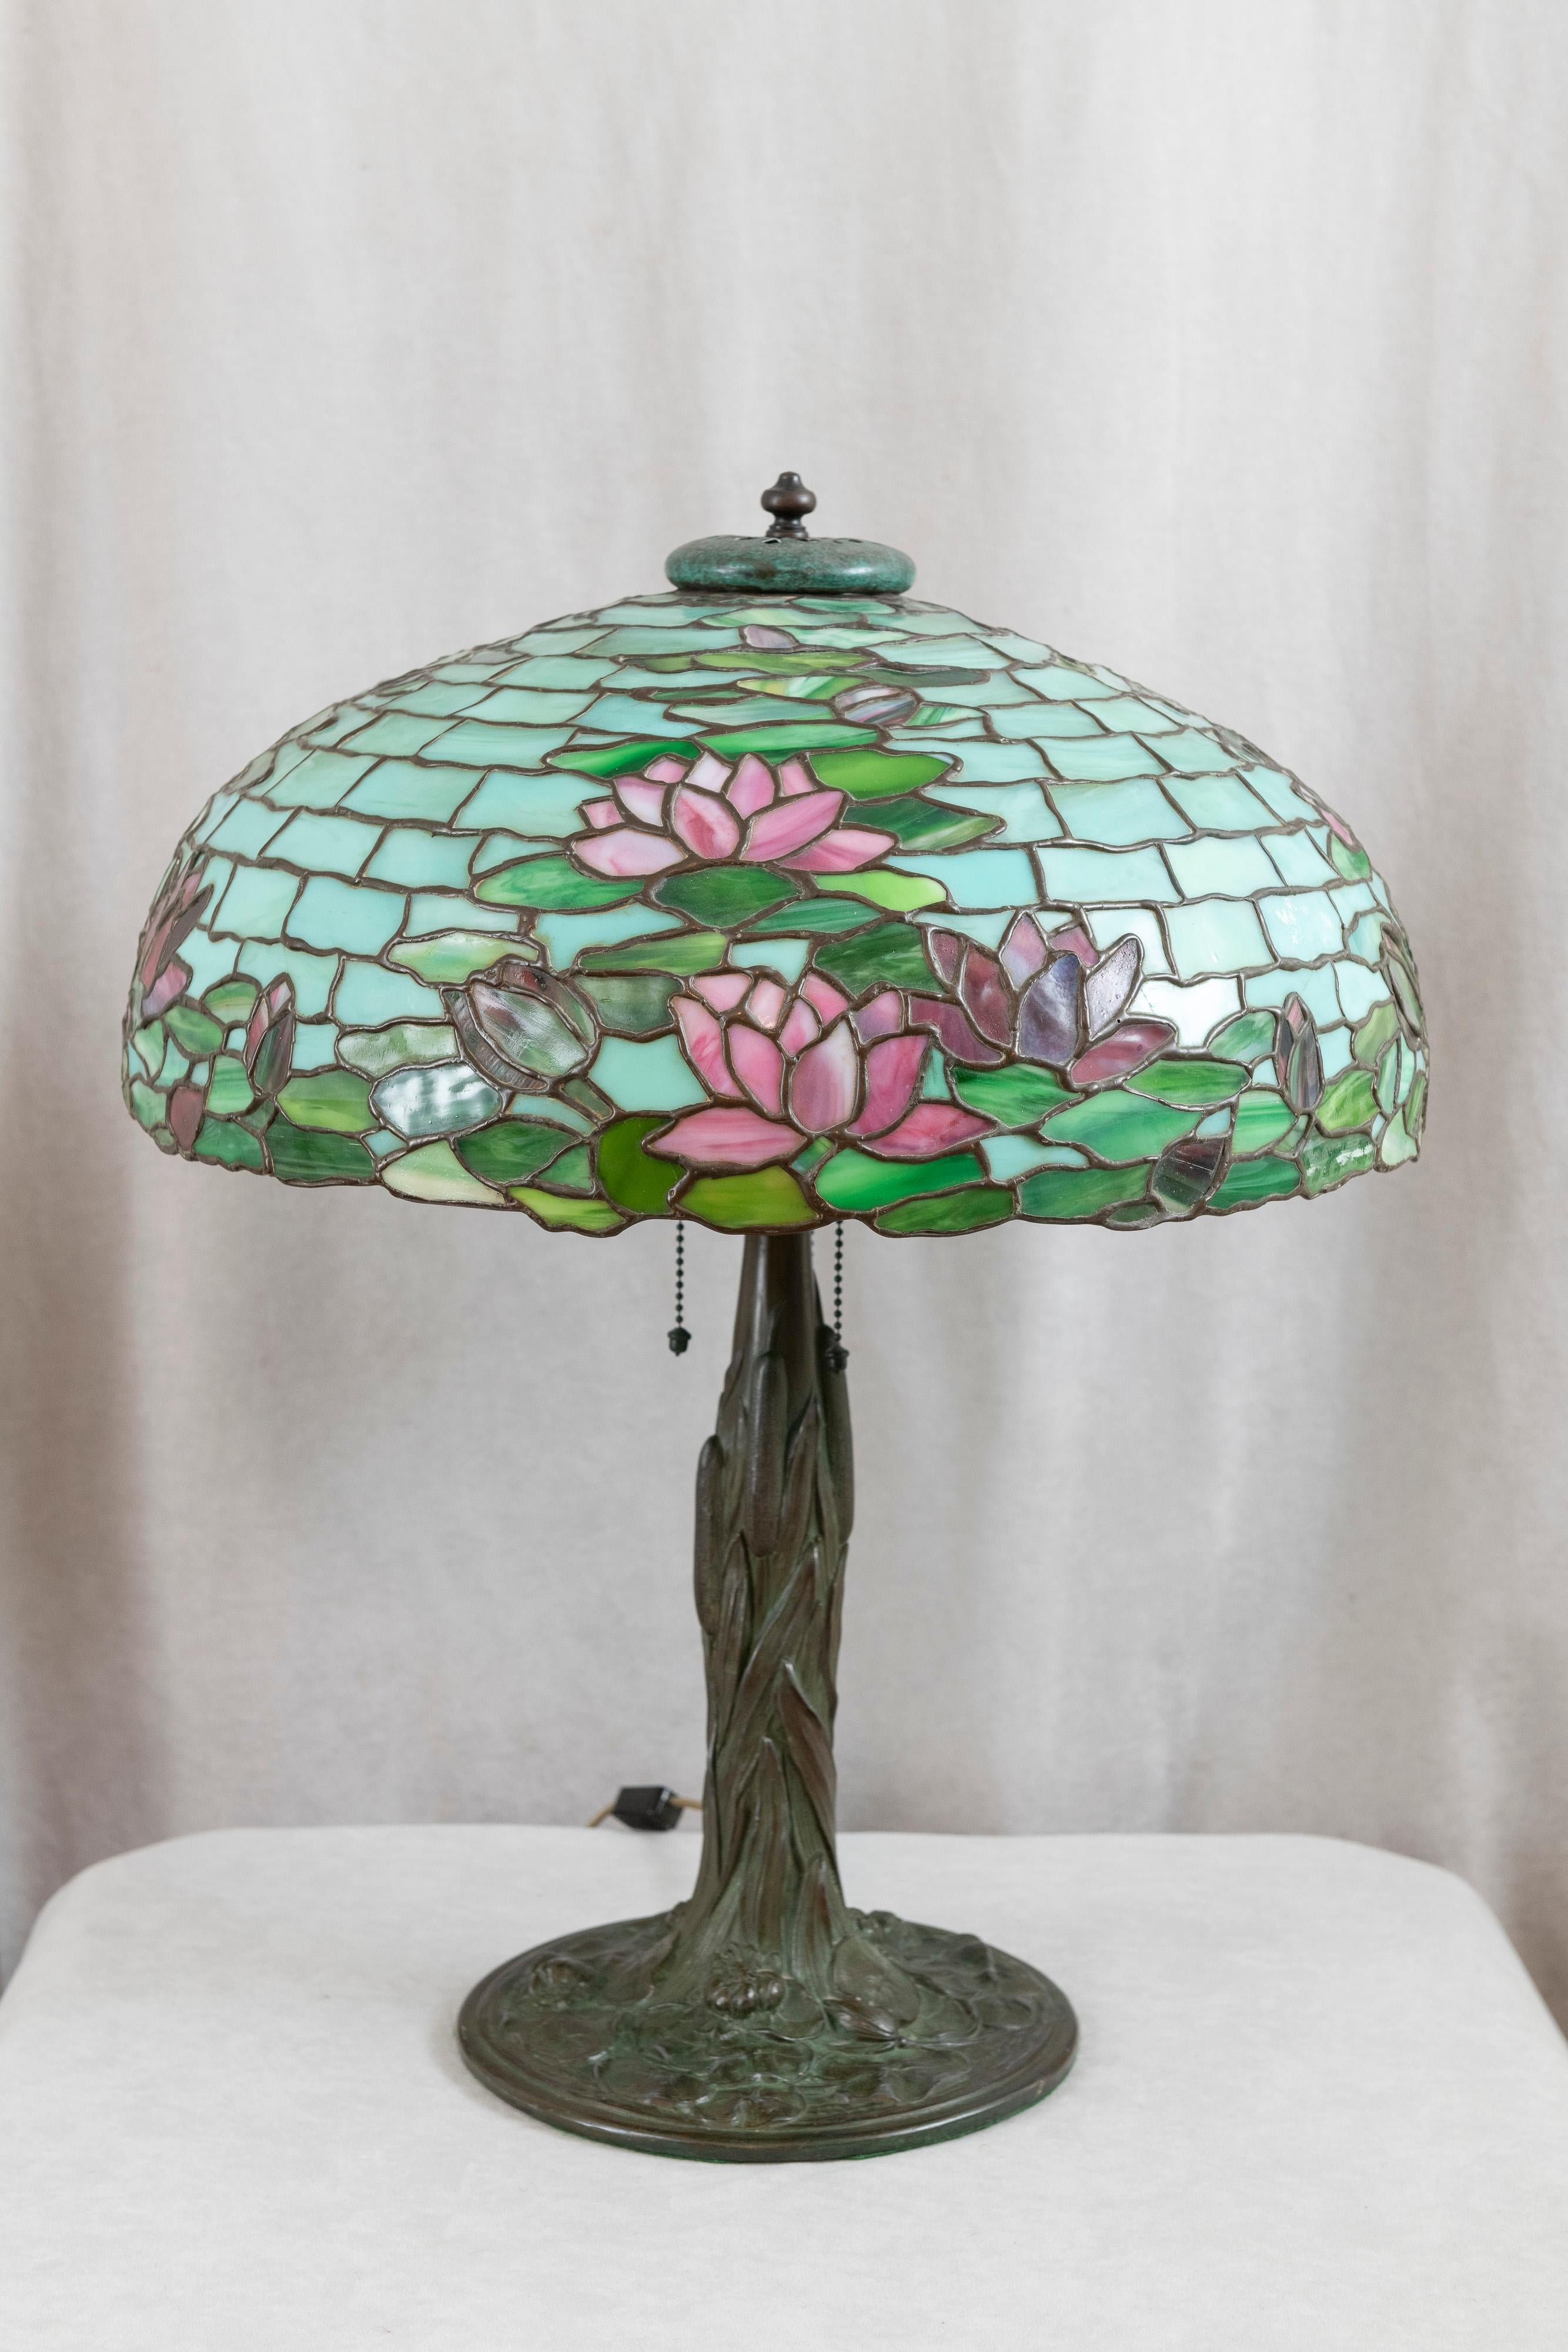 American Large Antique Leaded Glass Water Lily Table Lamp, by Duffner & Kimberly, 1905